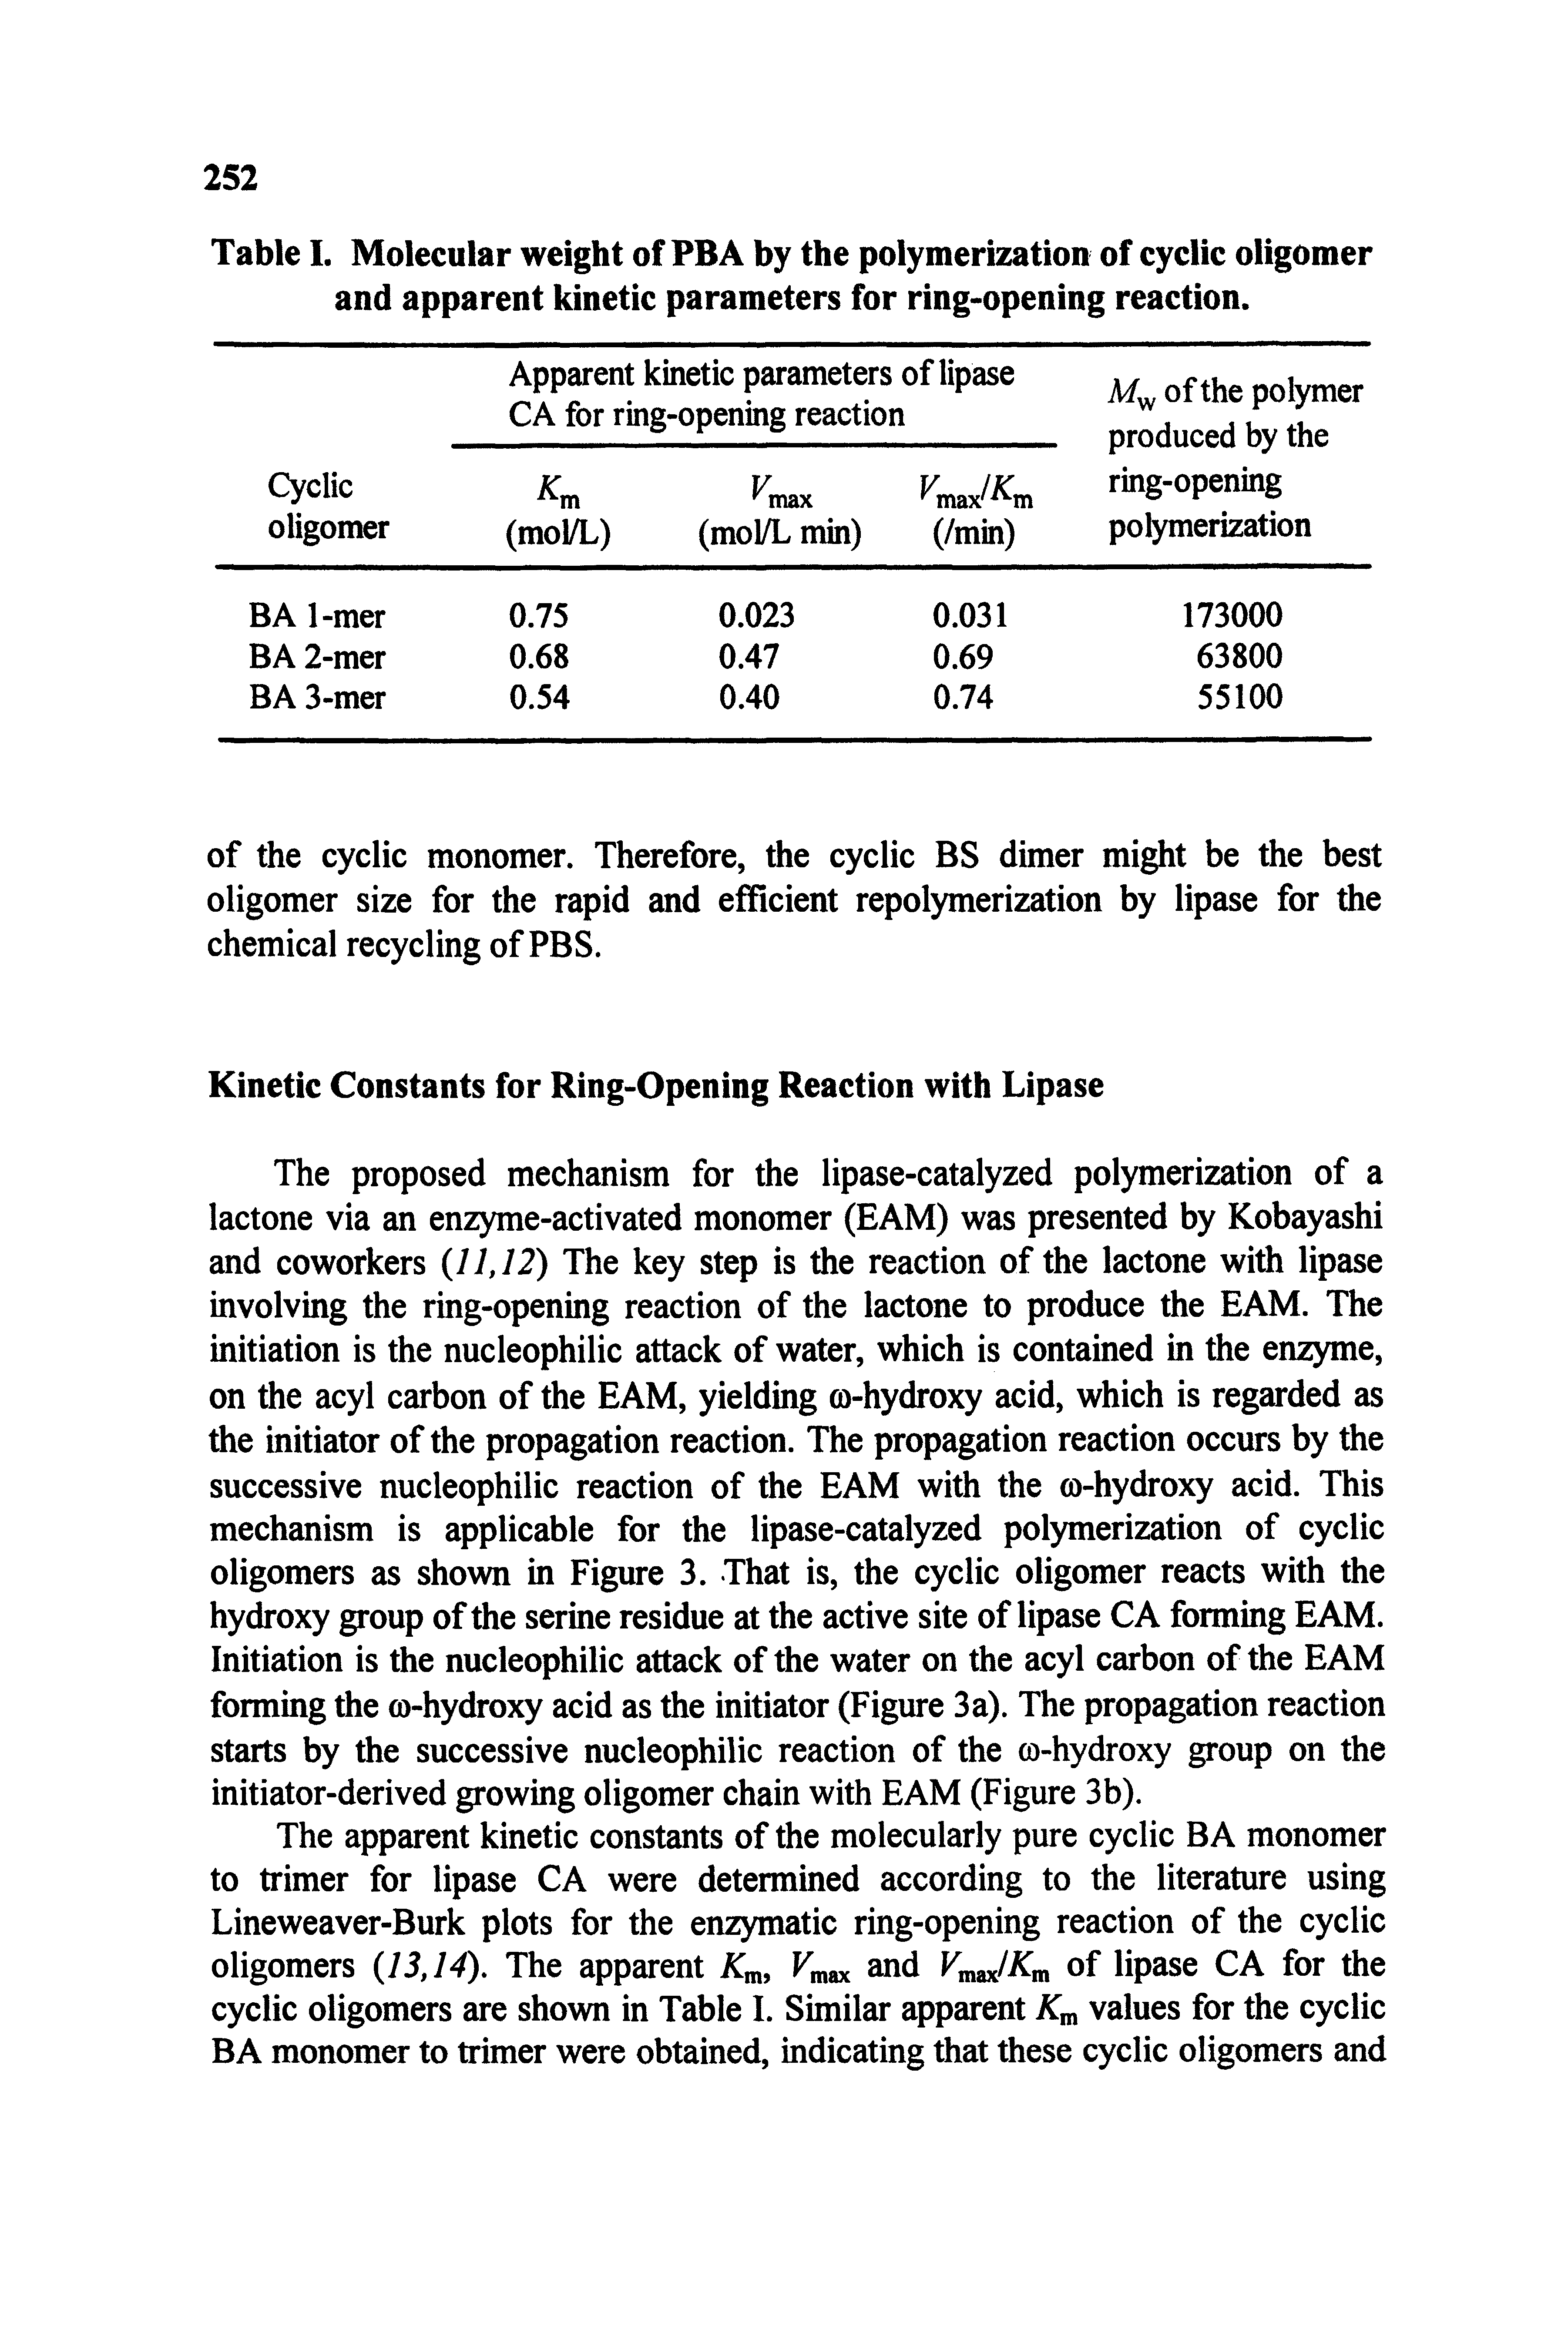 Table I. Molecular weight of PBA by the polymerization of cyclic oligomer and apparent kinetic parameters for ring-opening reaction.